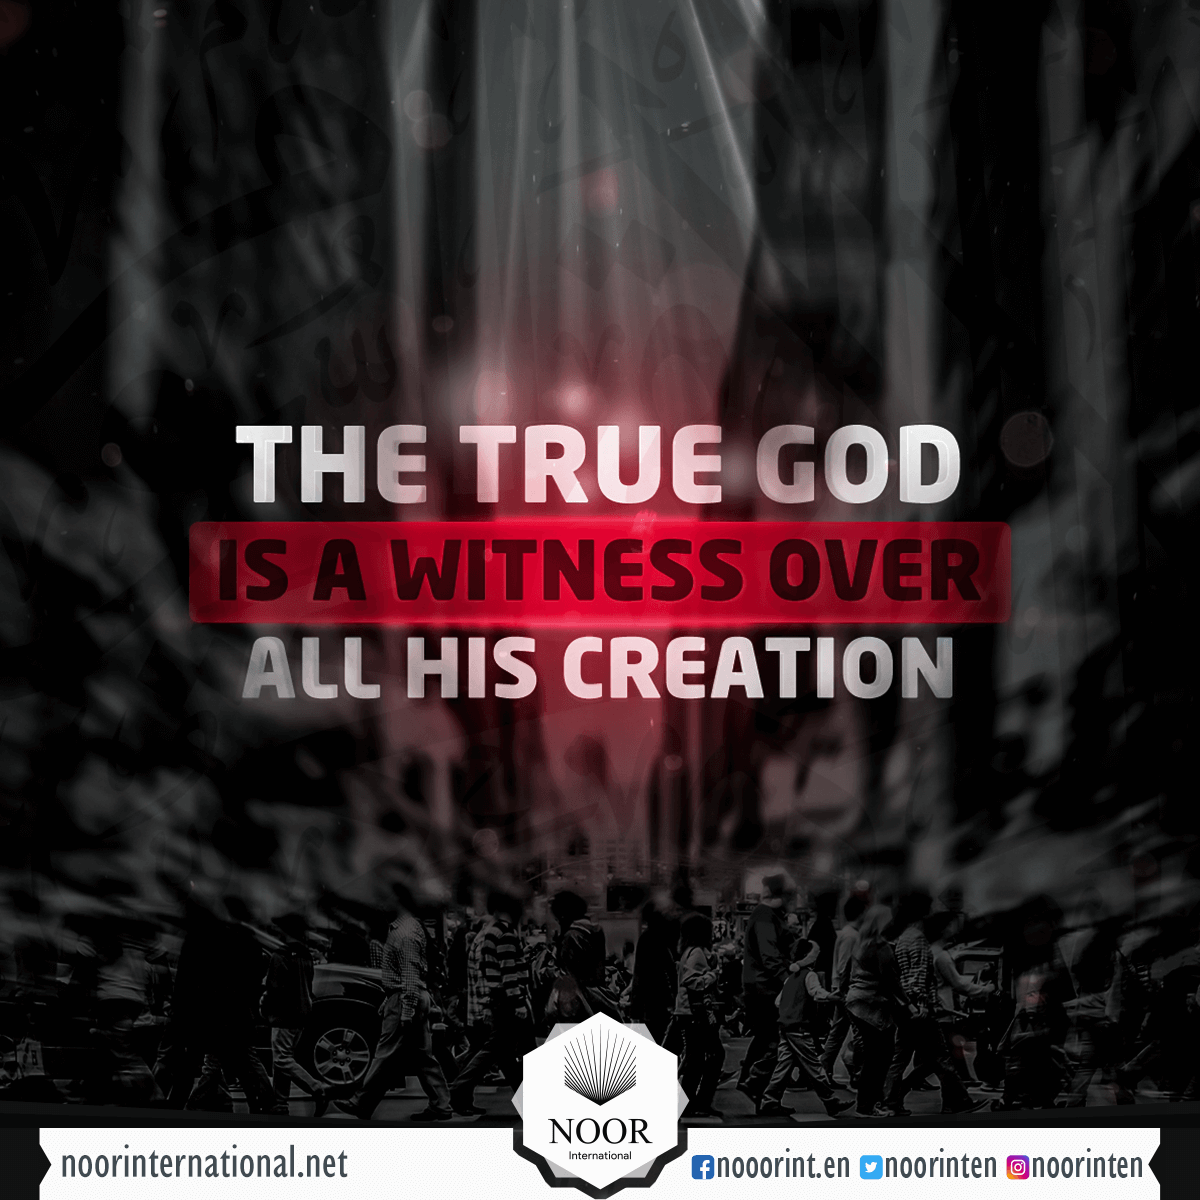 God ( Allah ) is a witness over all his creation